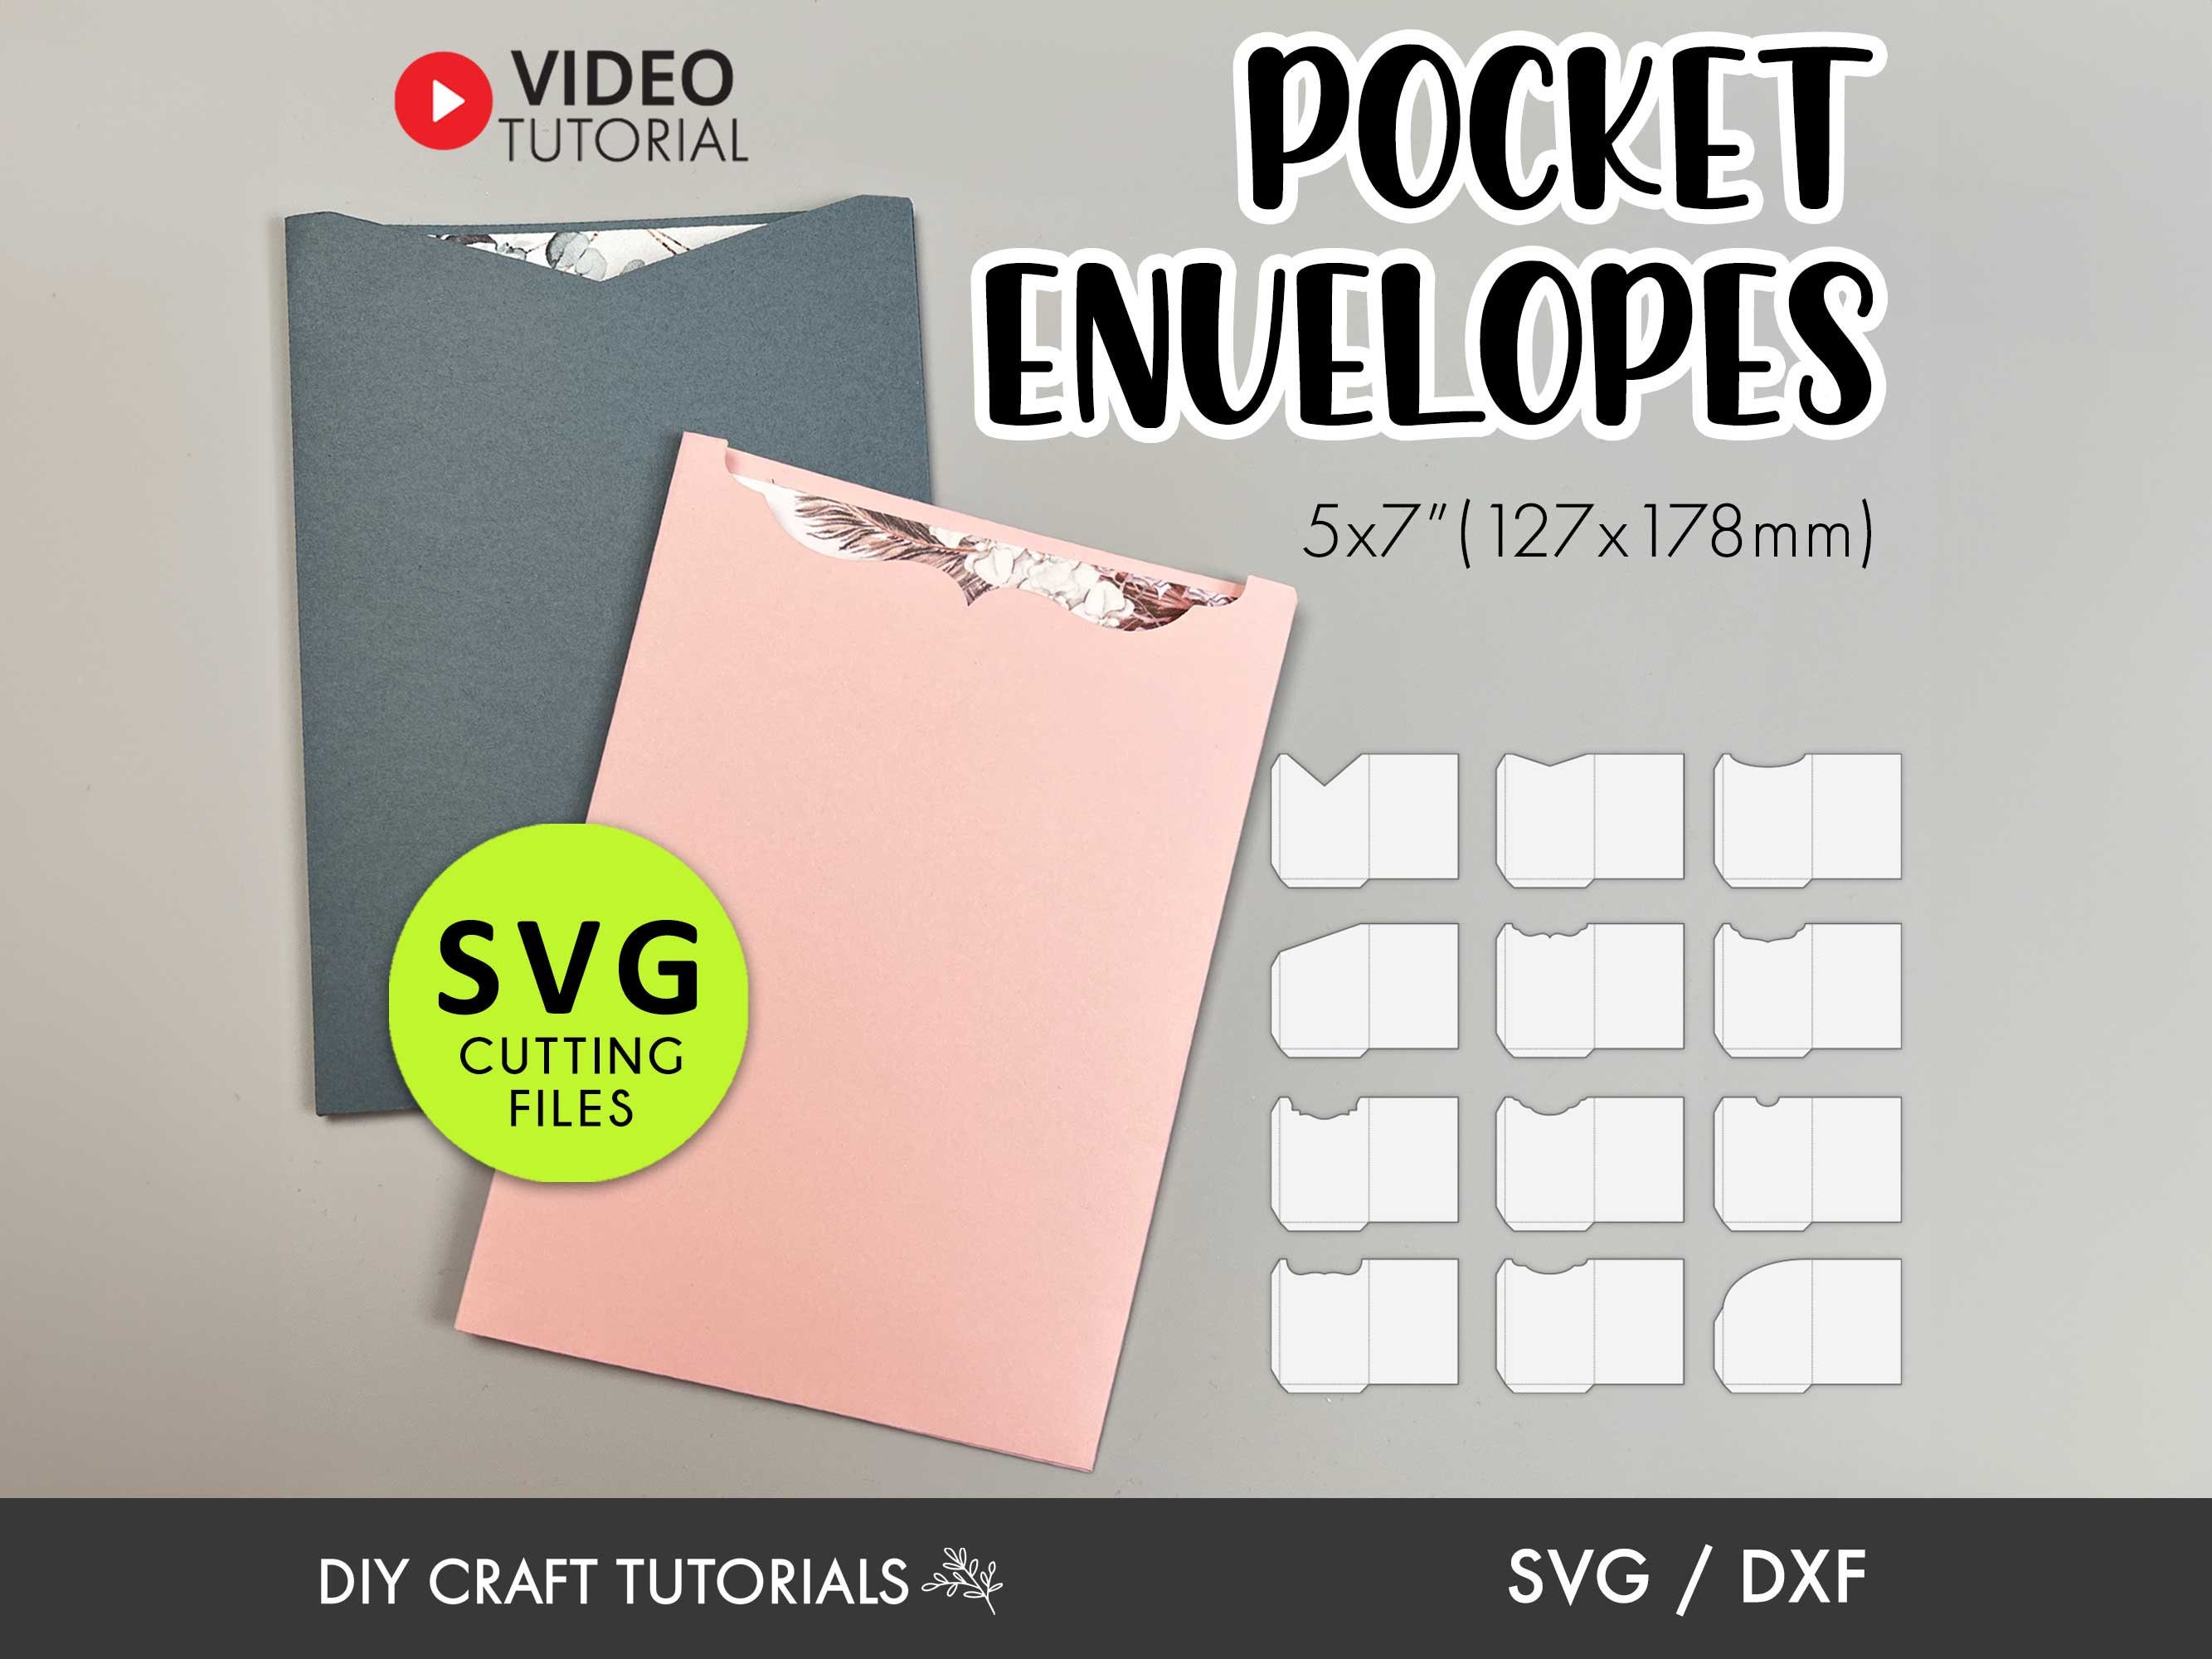 Set of 20 A7 Envelope Templates (5.25 x 7.25) for 5x7 invitation card >  SVG, ai, CRD, eps > Cricut > Cameo > ScanNcut > Instant Download 311